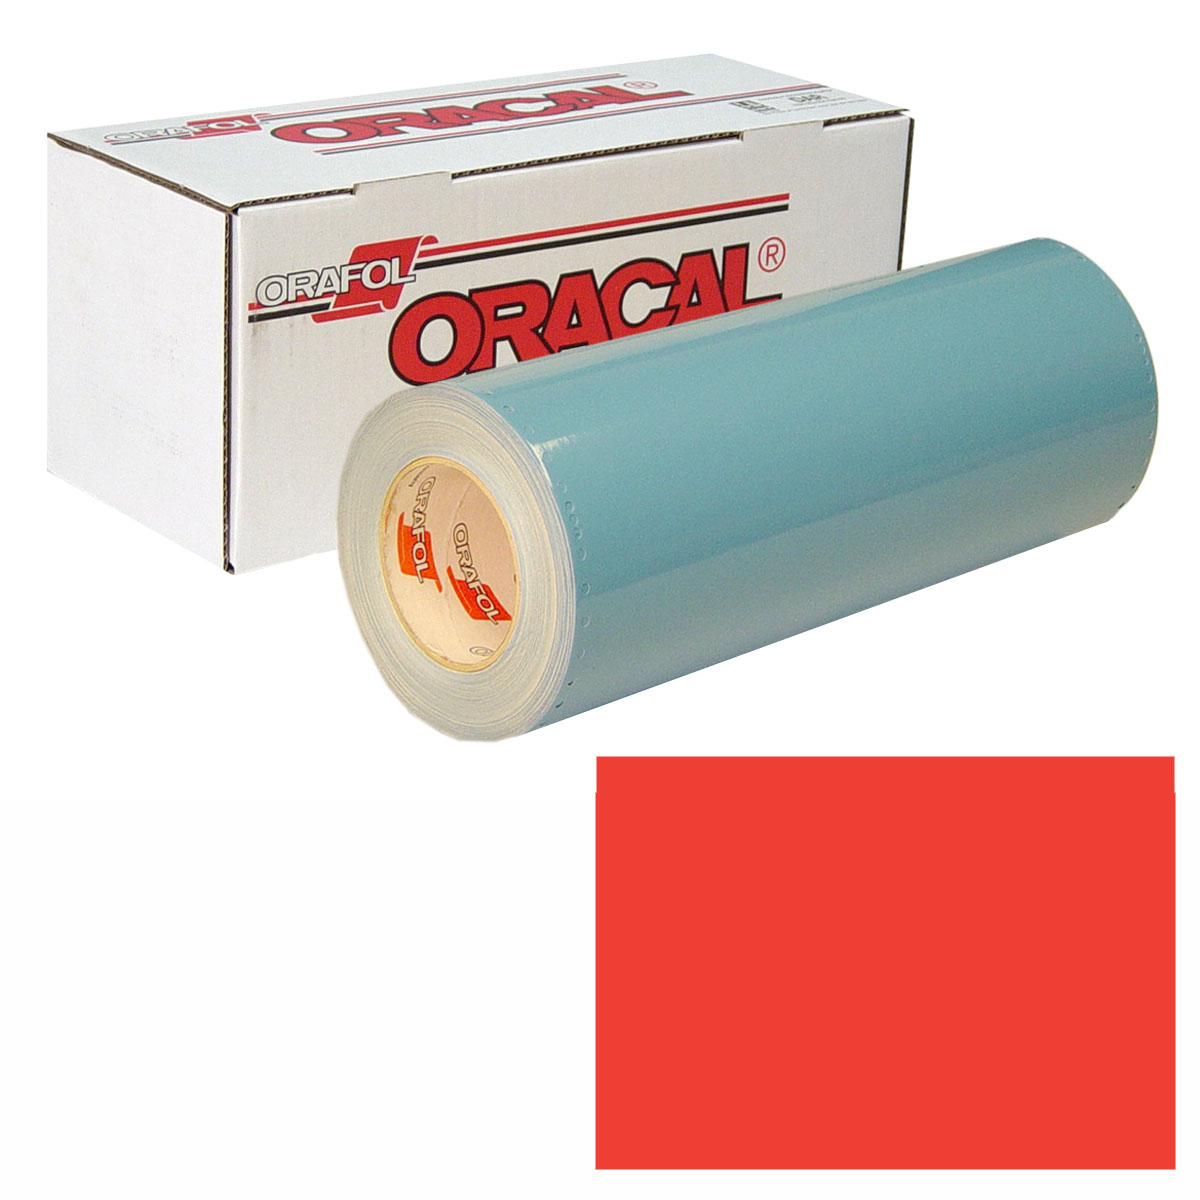 ORACAL 951 30in X 10yd 326 Signal Red